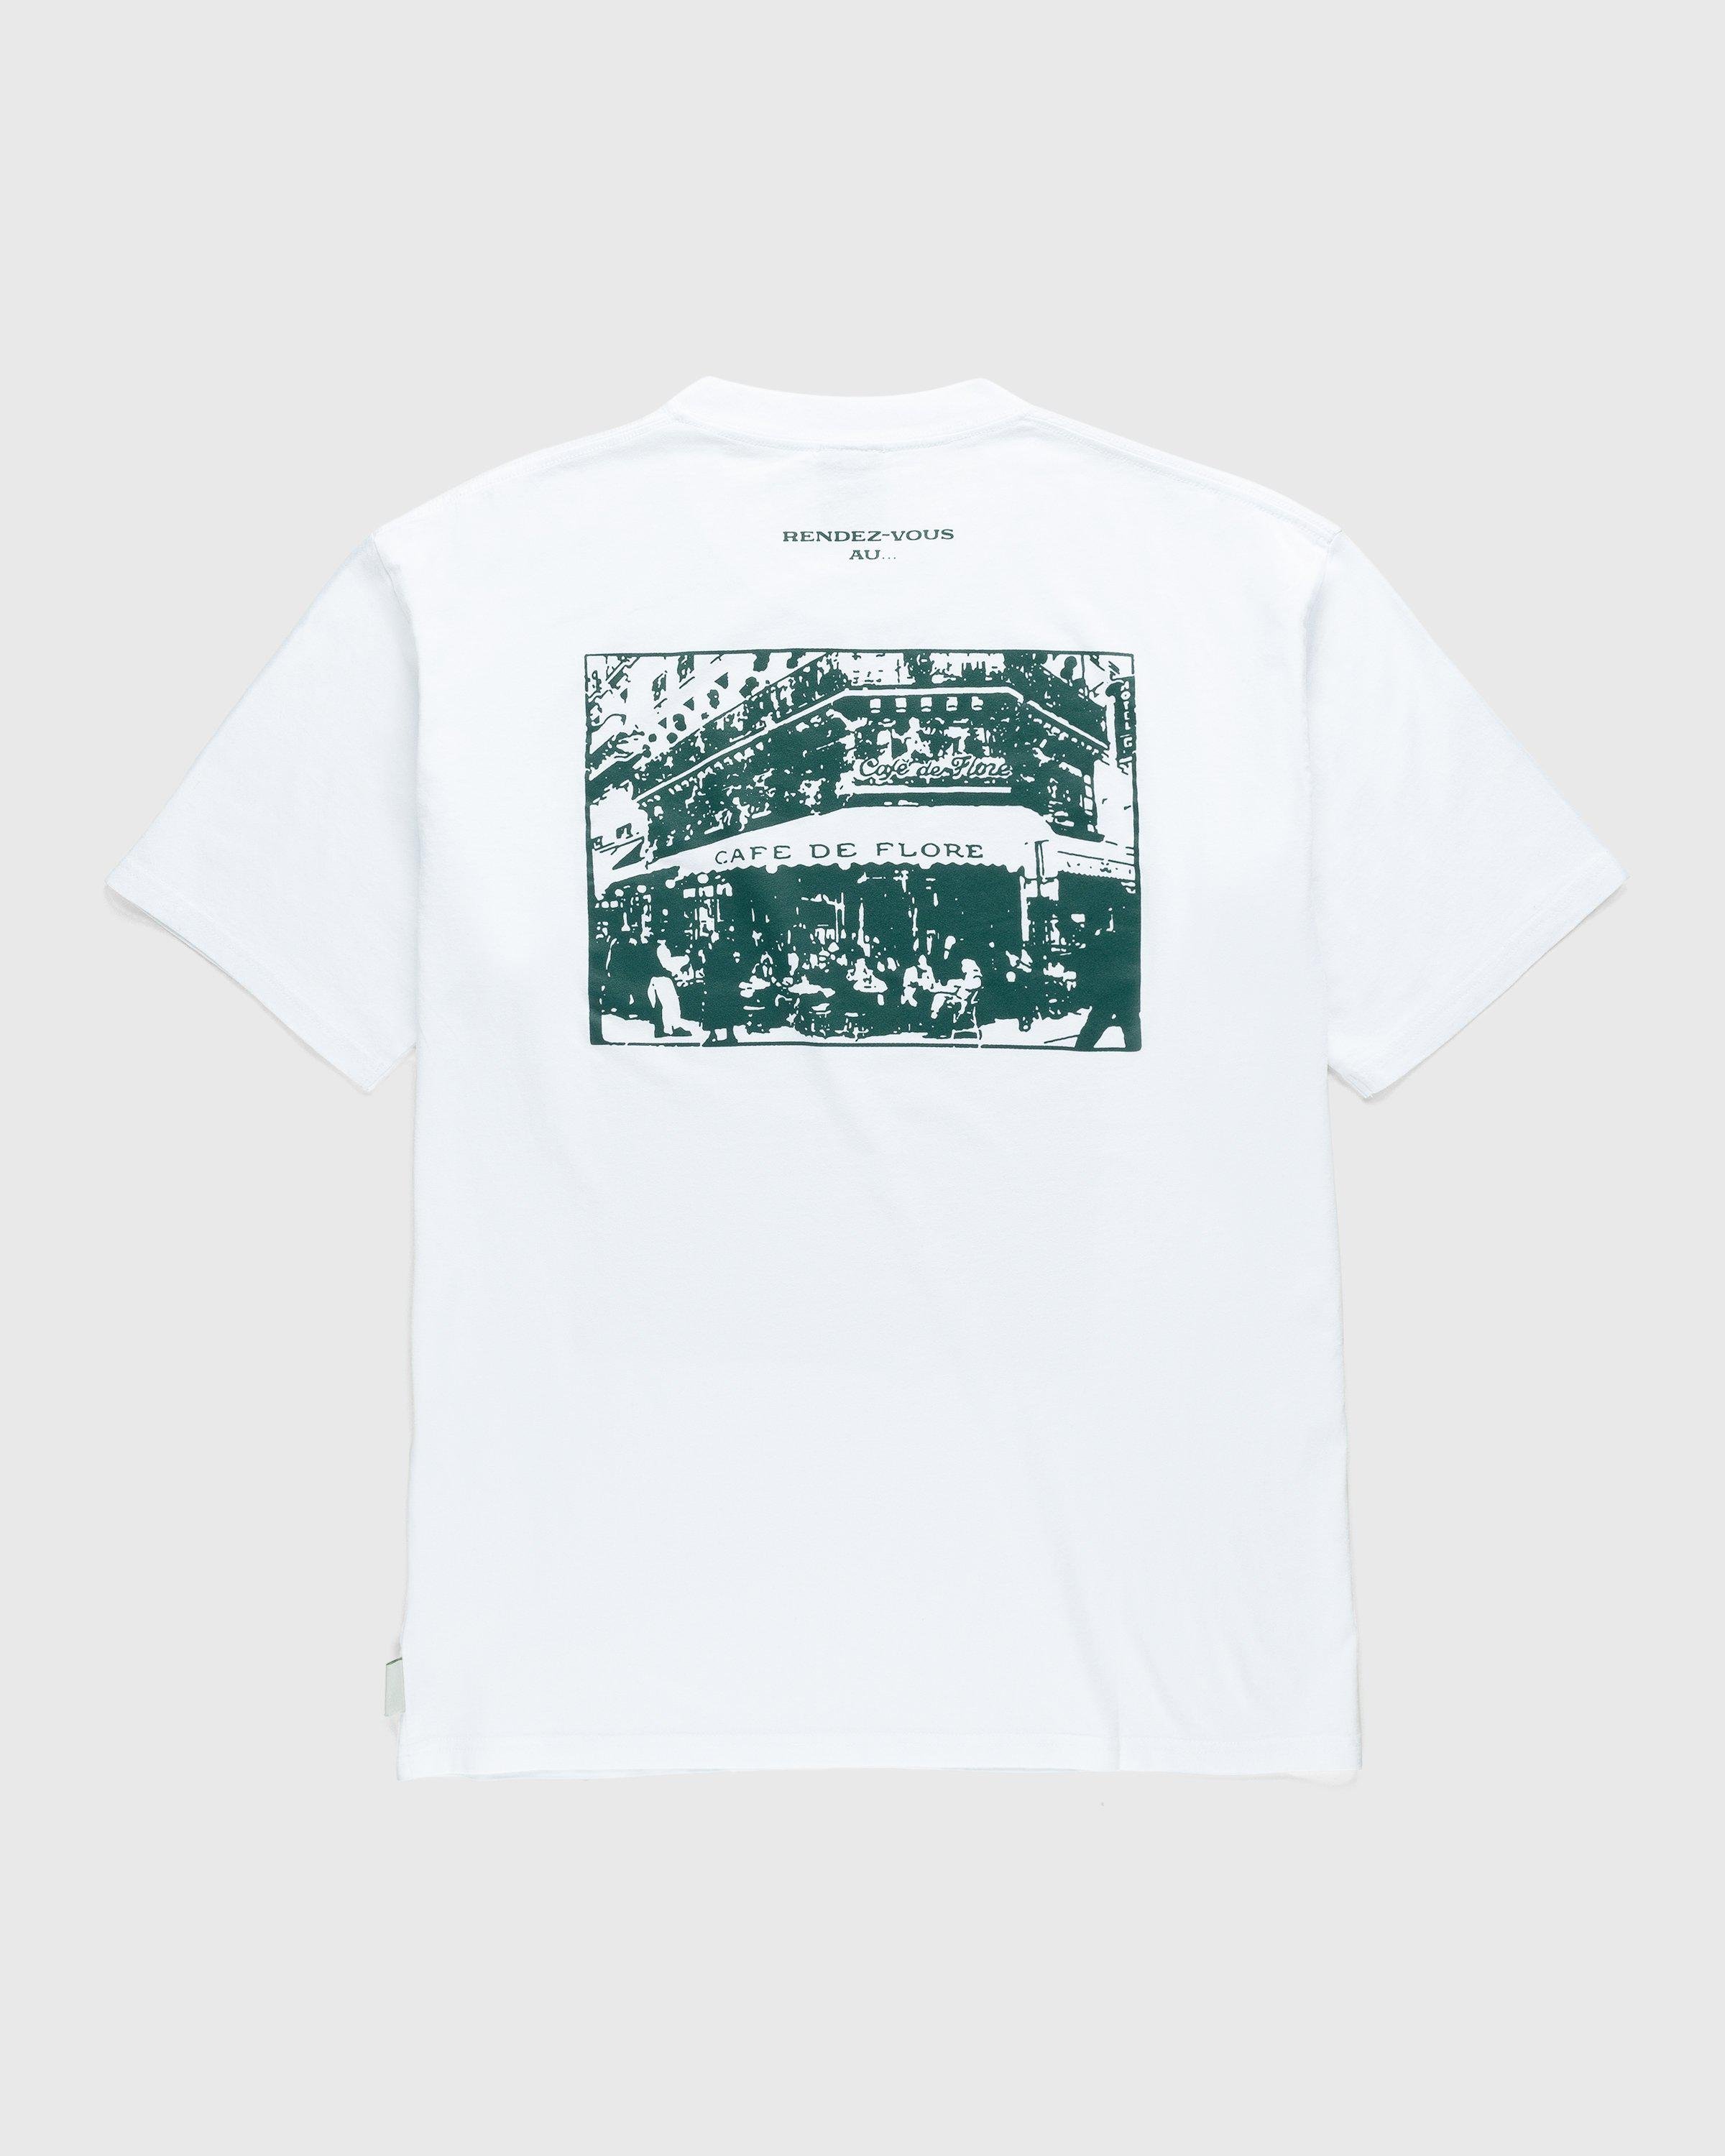 Not In Paris 4 Storefront T-Shirt White by CAFE DE FLORE X HIGHSNOBIETY